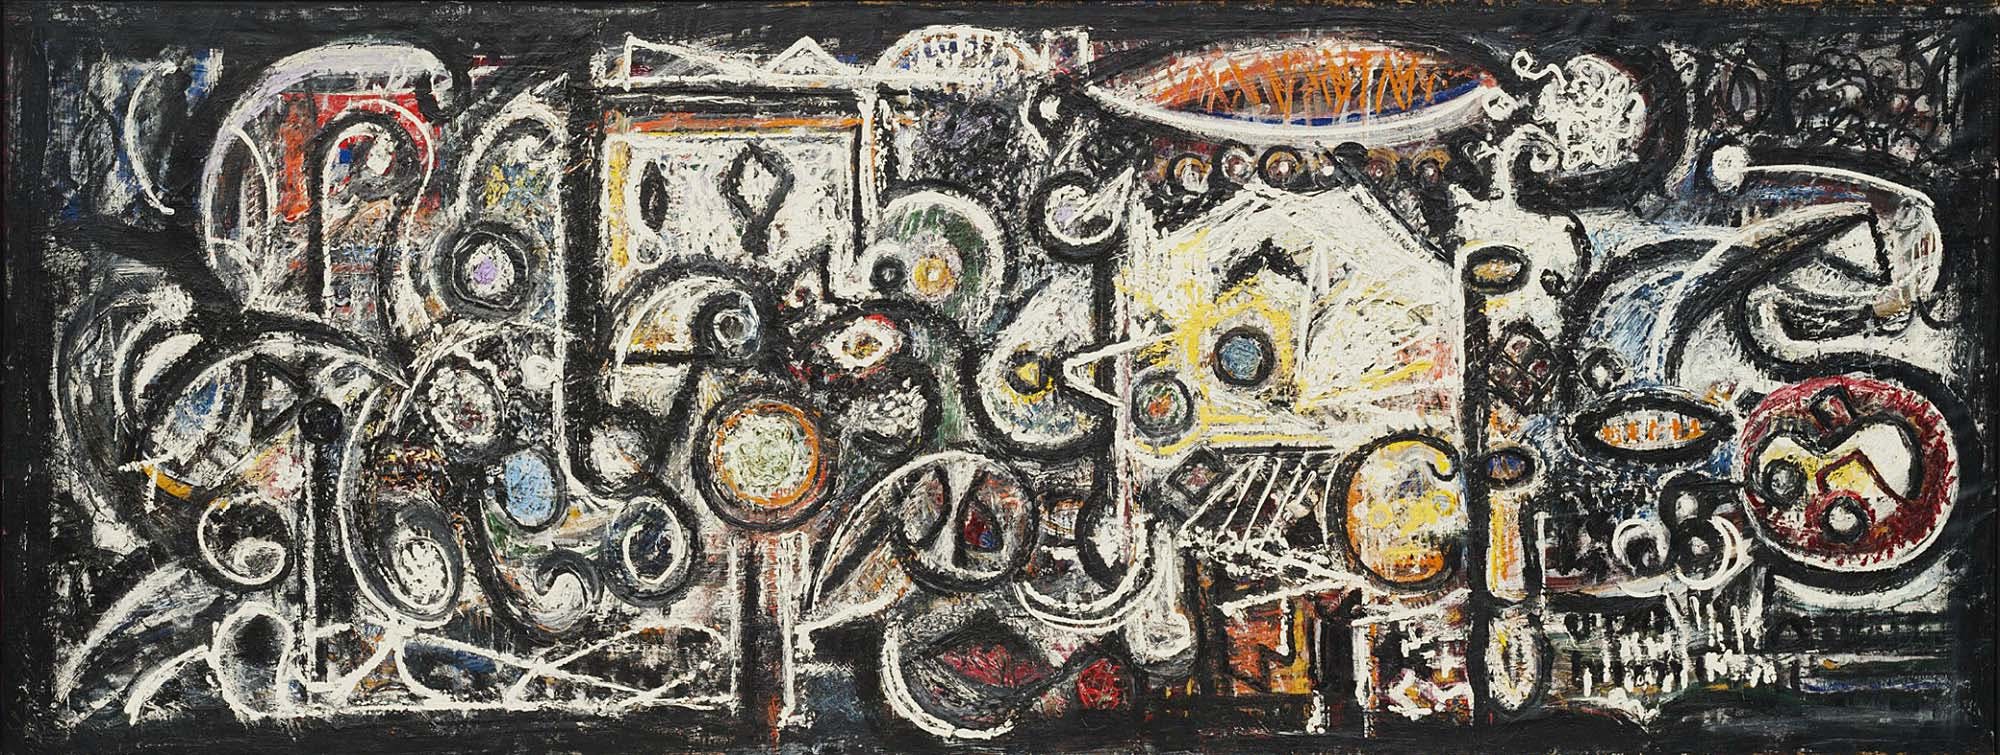 Fugue Number 2
1943
Oil and sand on canvas
41 1/8 x 106 1/2 in. (104.2 x 270.4 cm)
The Museum of Modern Art, New York, Given anonymously (1100.1969)
 – The Richard Pousette-Dart Foundation